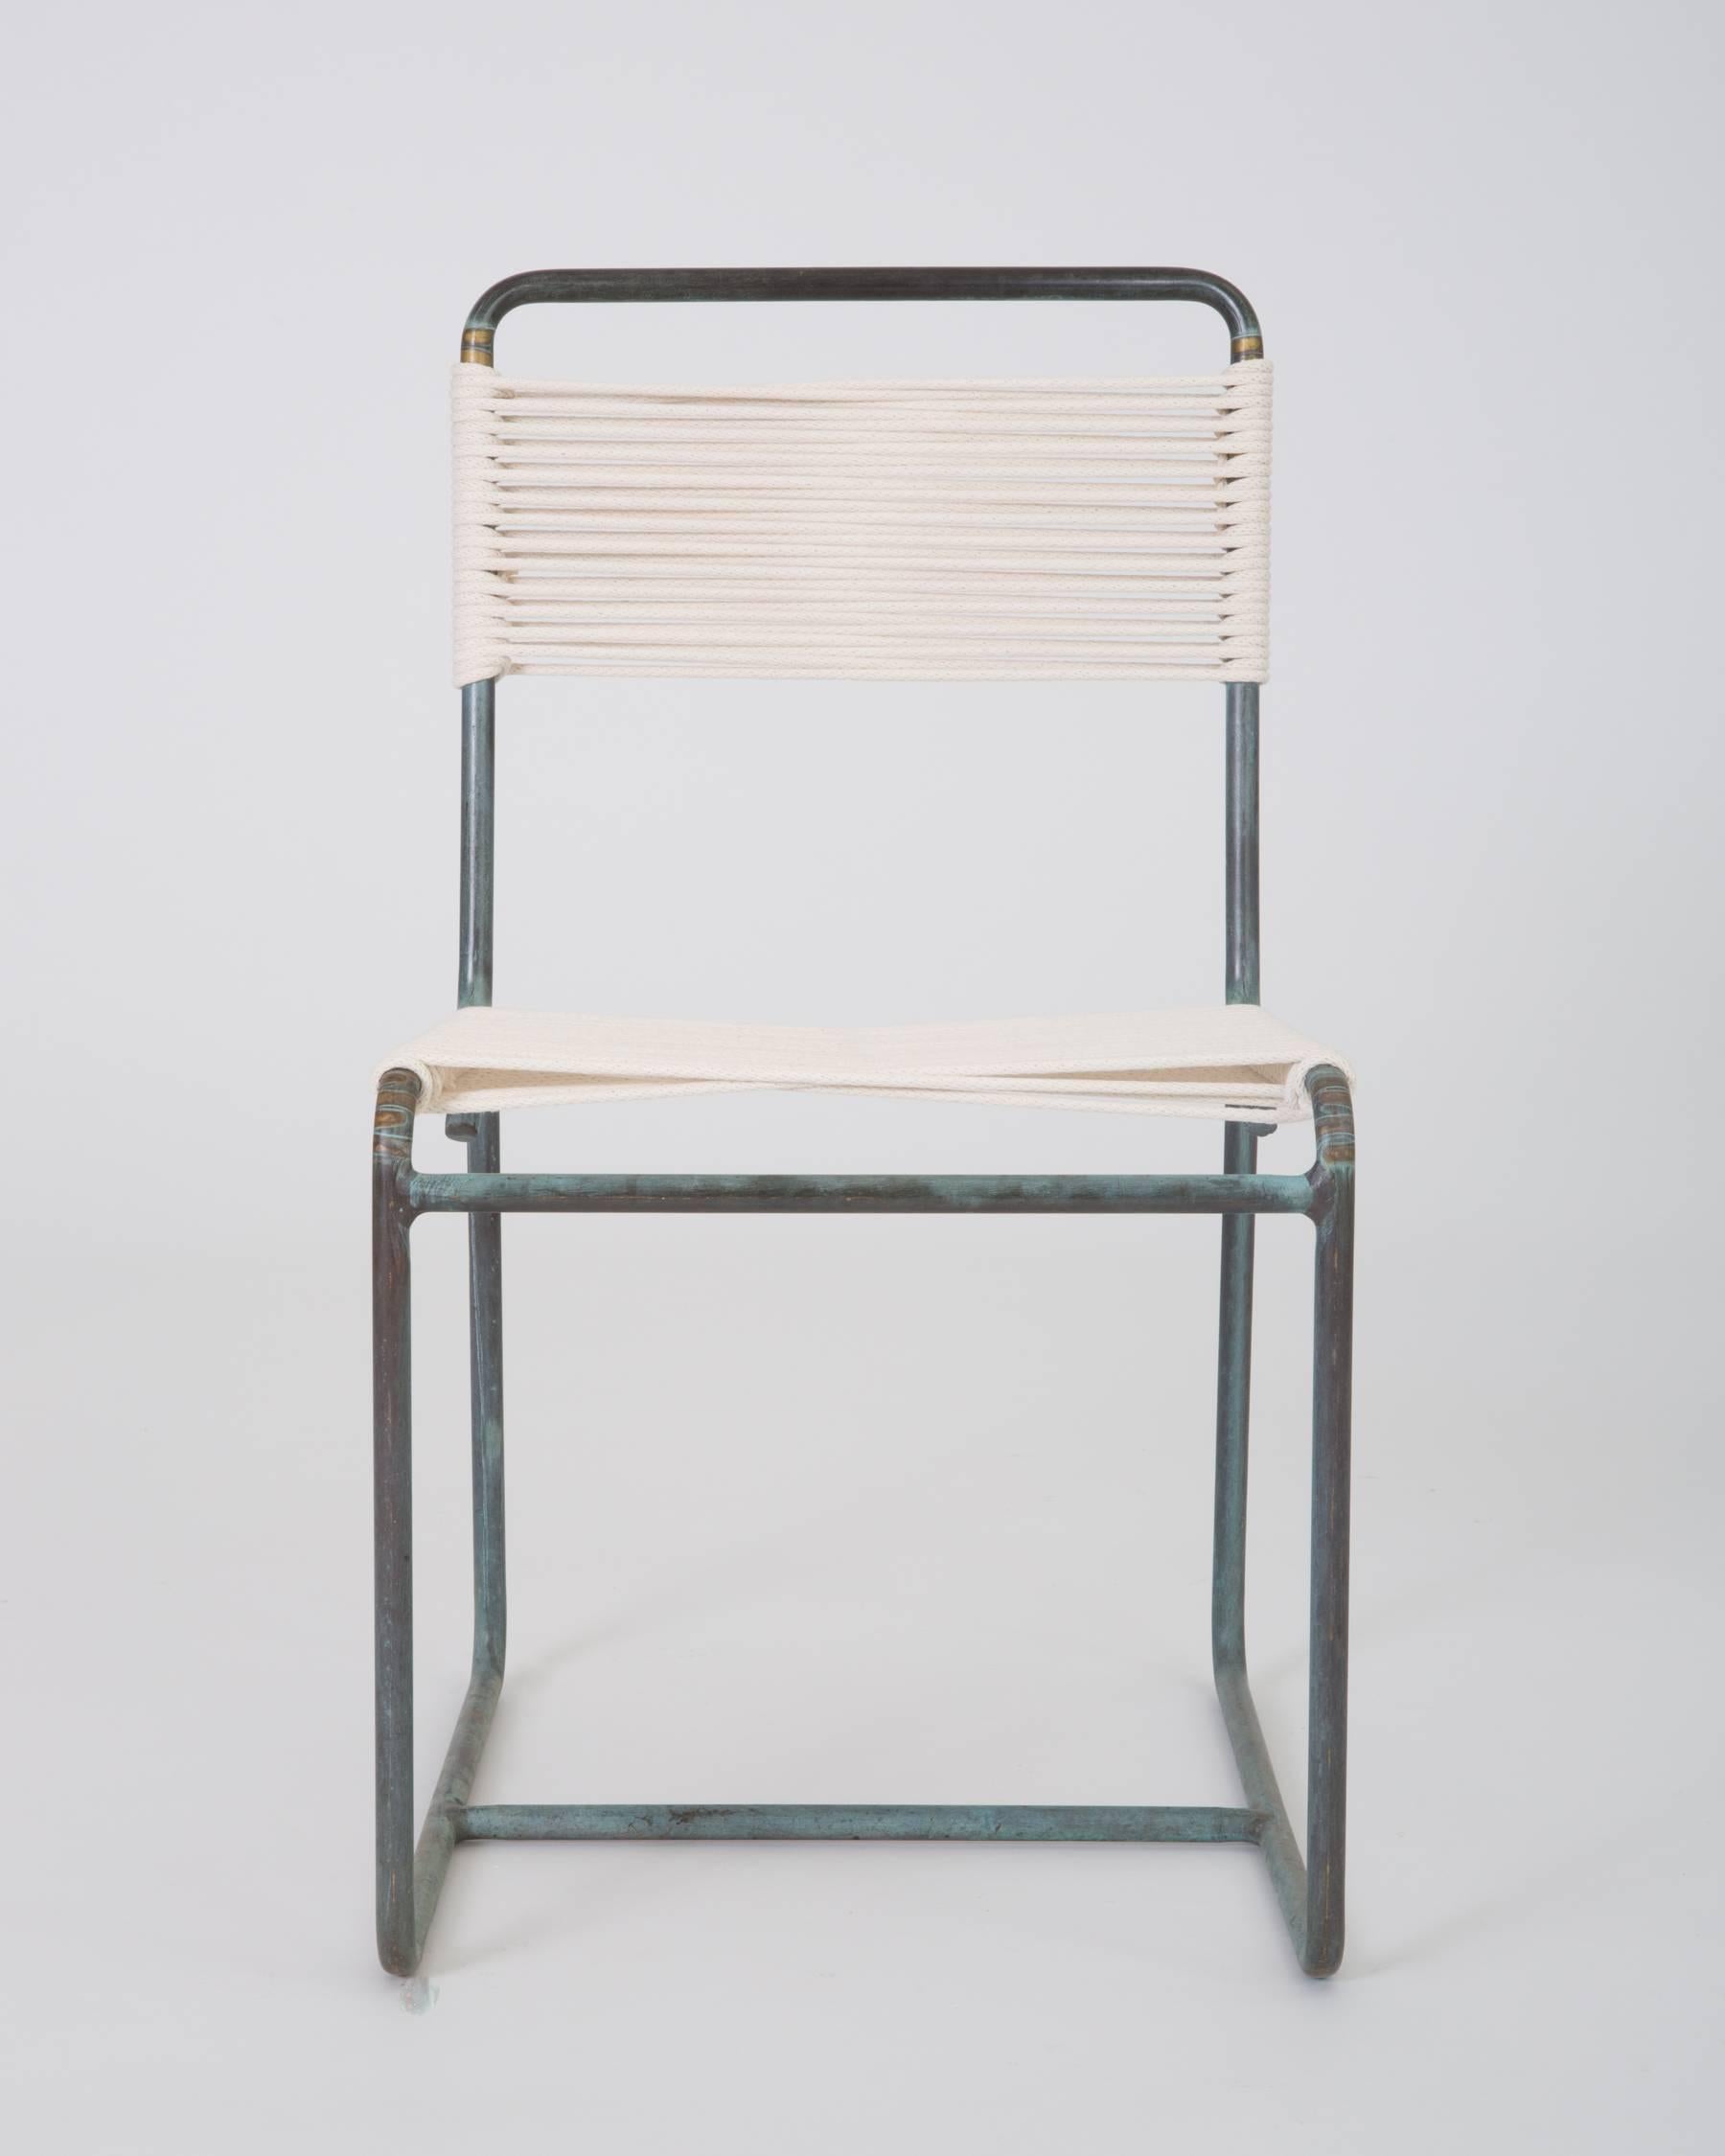 A patio dining side chair in patinated bronze, designed by Walter Lamb and produced by Brown Jordan. The chair has a tubular frame supported by bent bronze runners, with each end terminating in a stylistic curlicue. The strung seat and backrest are